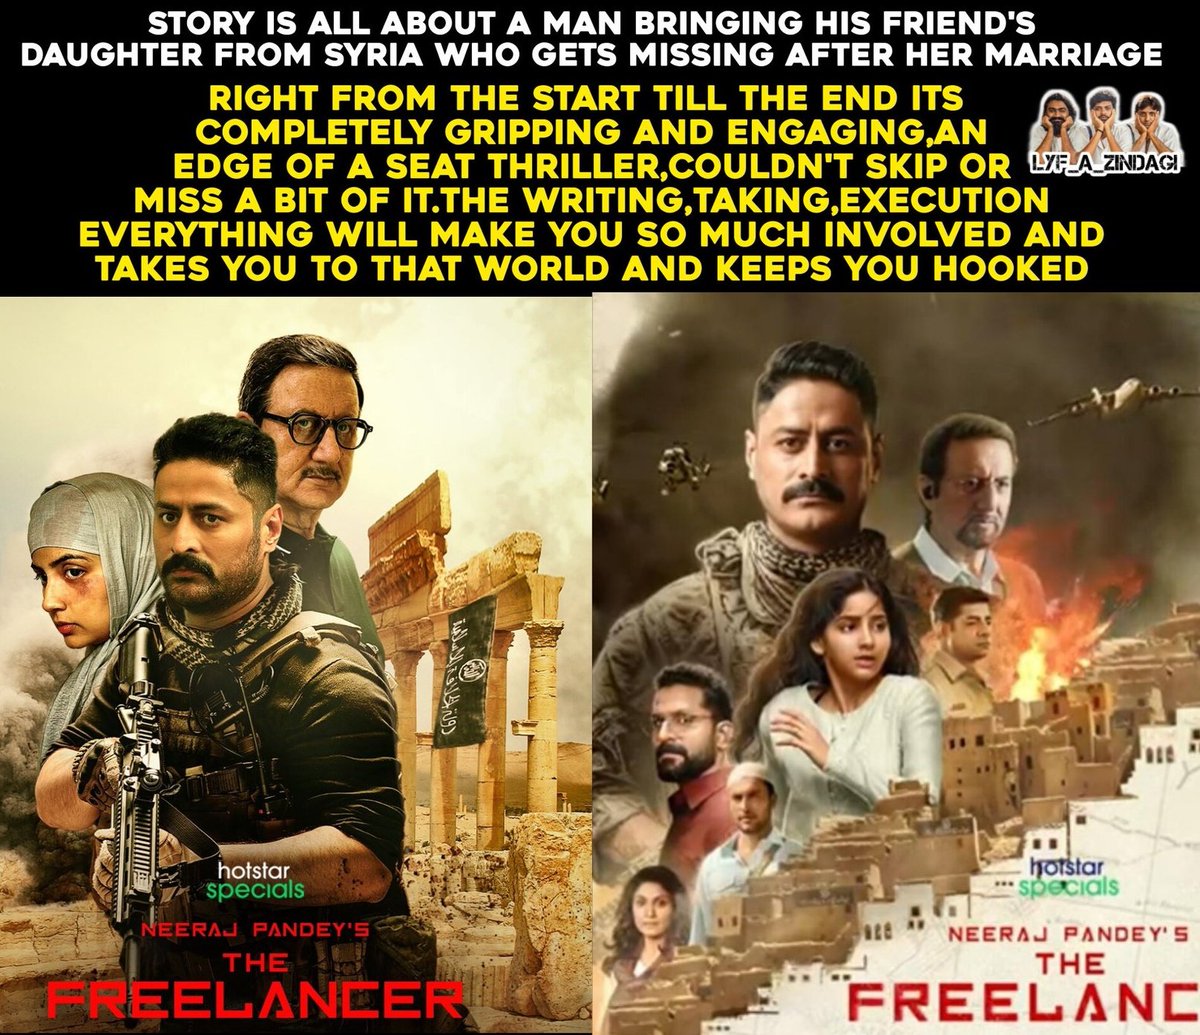 Highly recommend watching this webseries. Its for sure an edge of seat thriller & keeps u hooked till the end!! 

#TheFreelancer #TheFreelancerOnHotstar